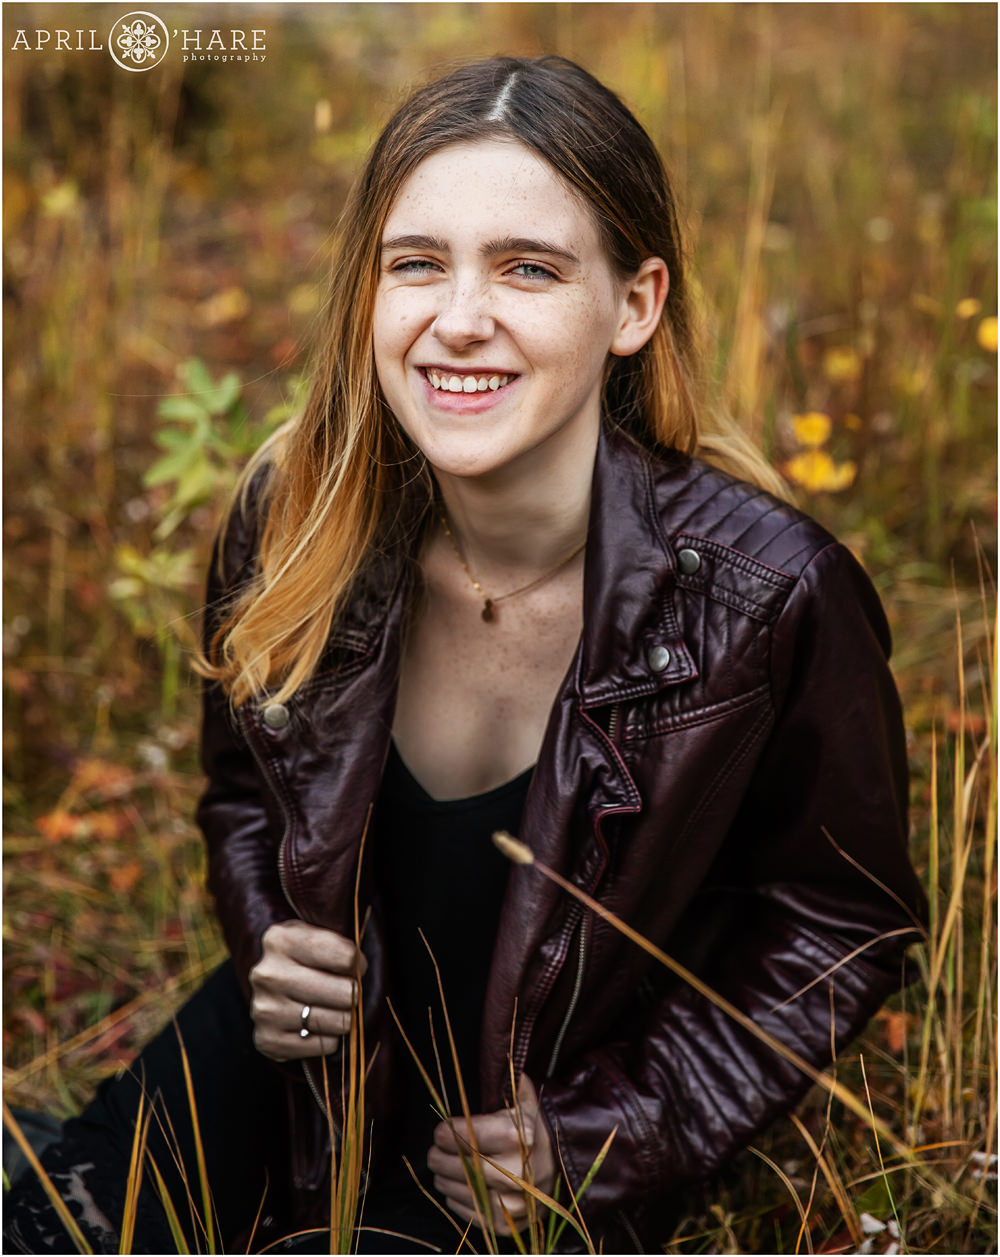 Gorgeous fall color senior portraits on Squaw Pass Road in Evergreen Colorado